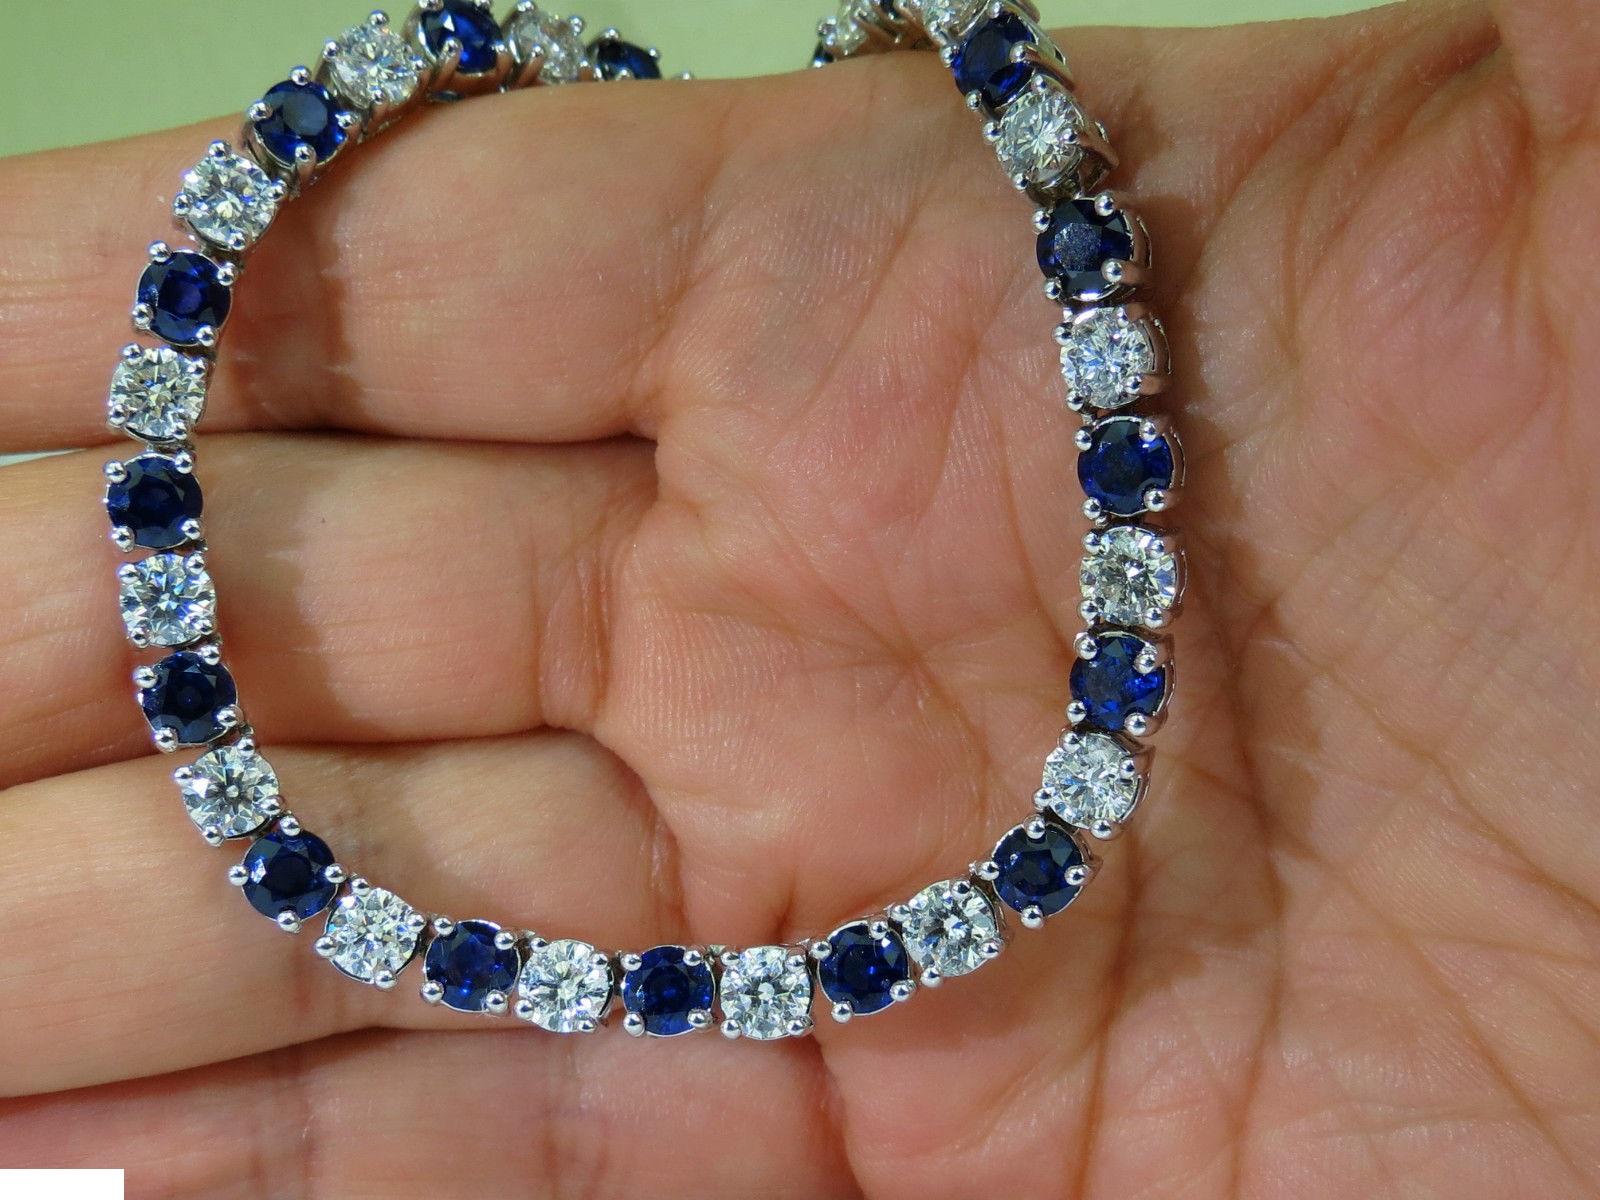 19.66ct. Natural Sapphires

Faceted Brilliant Rounds, Full cut 

Exceptional Clean clarity

Classic Bright Sparkling Royal Blue tone

Transparent 

Average: 5mm each

Sapphires in this quality takes much time to match



14.02ct. Diamonds.

Rounds,